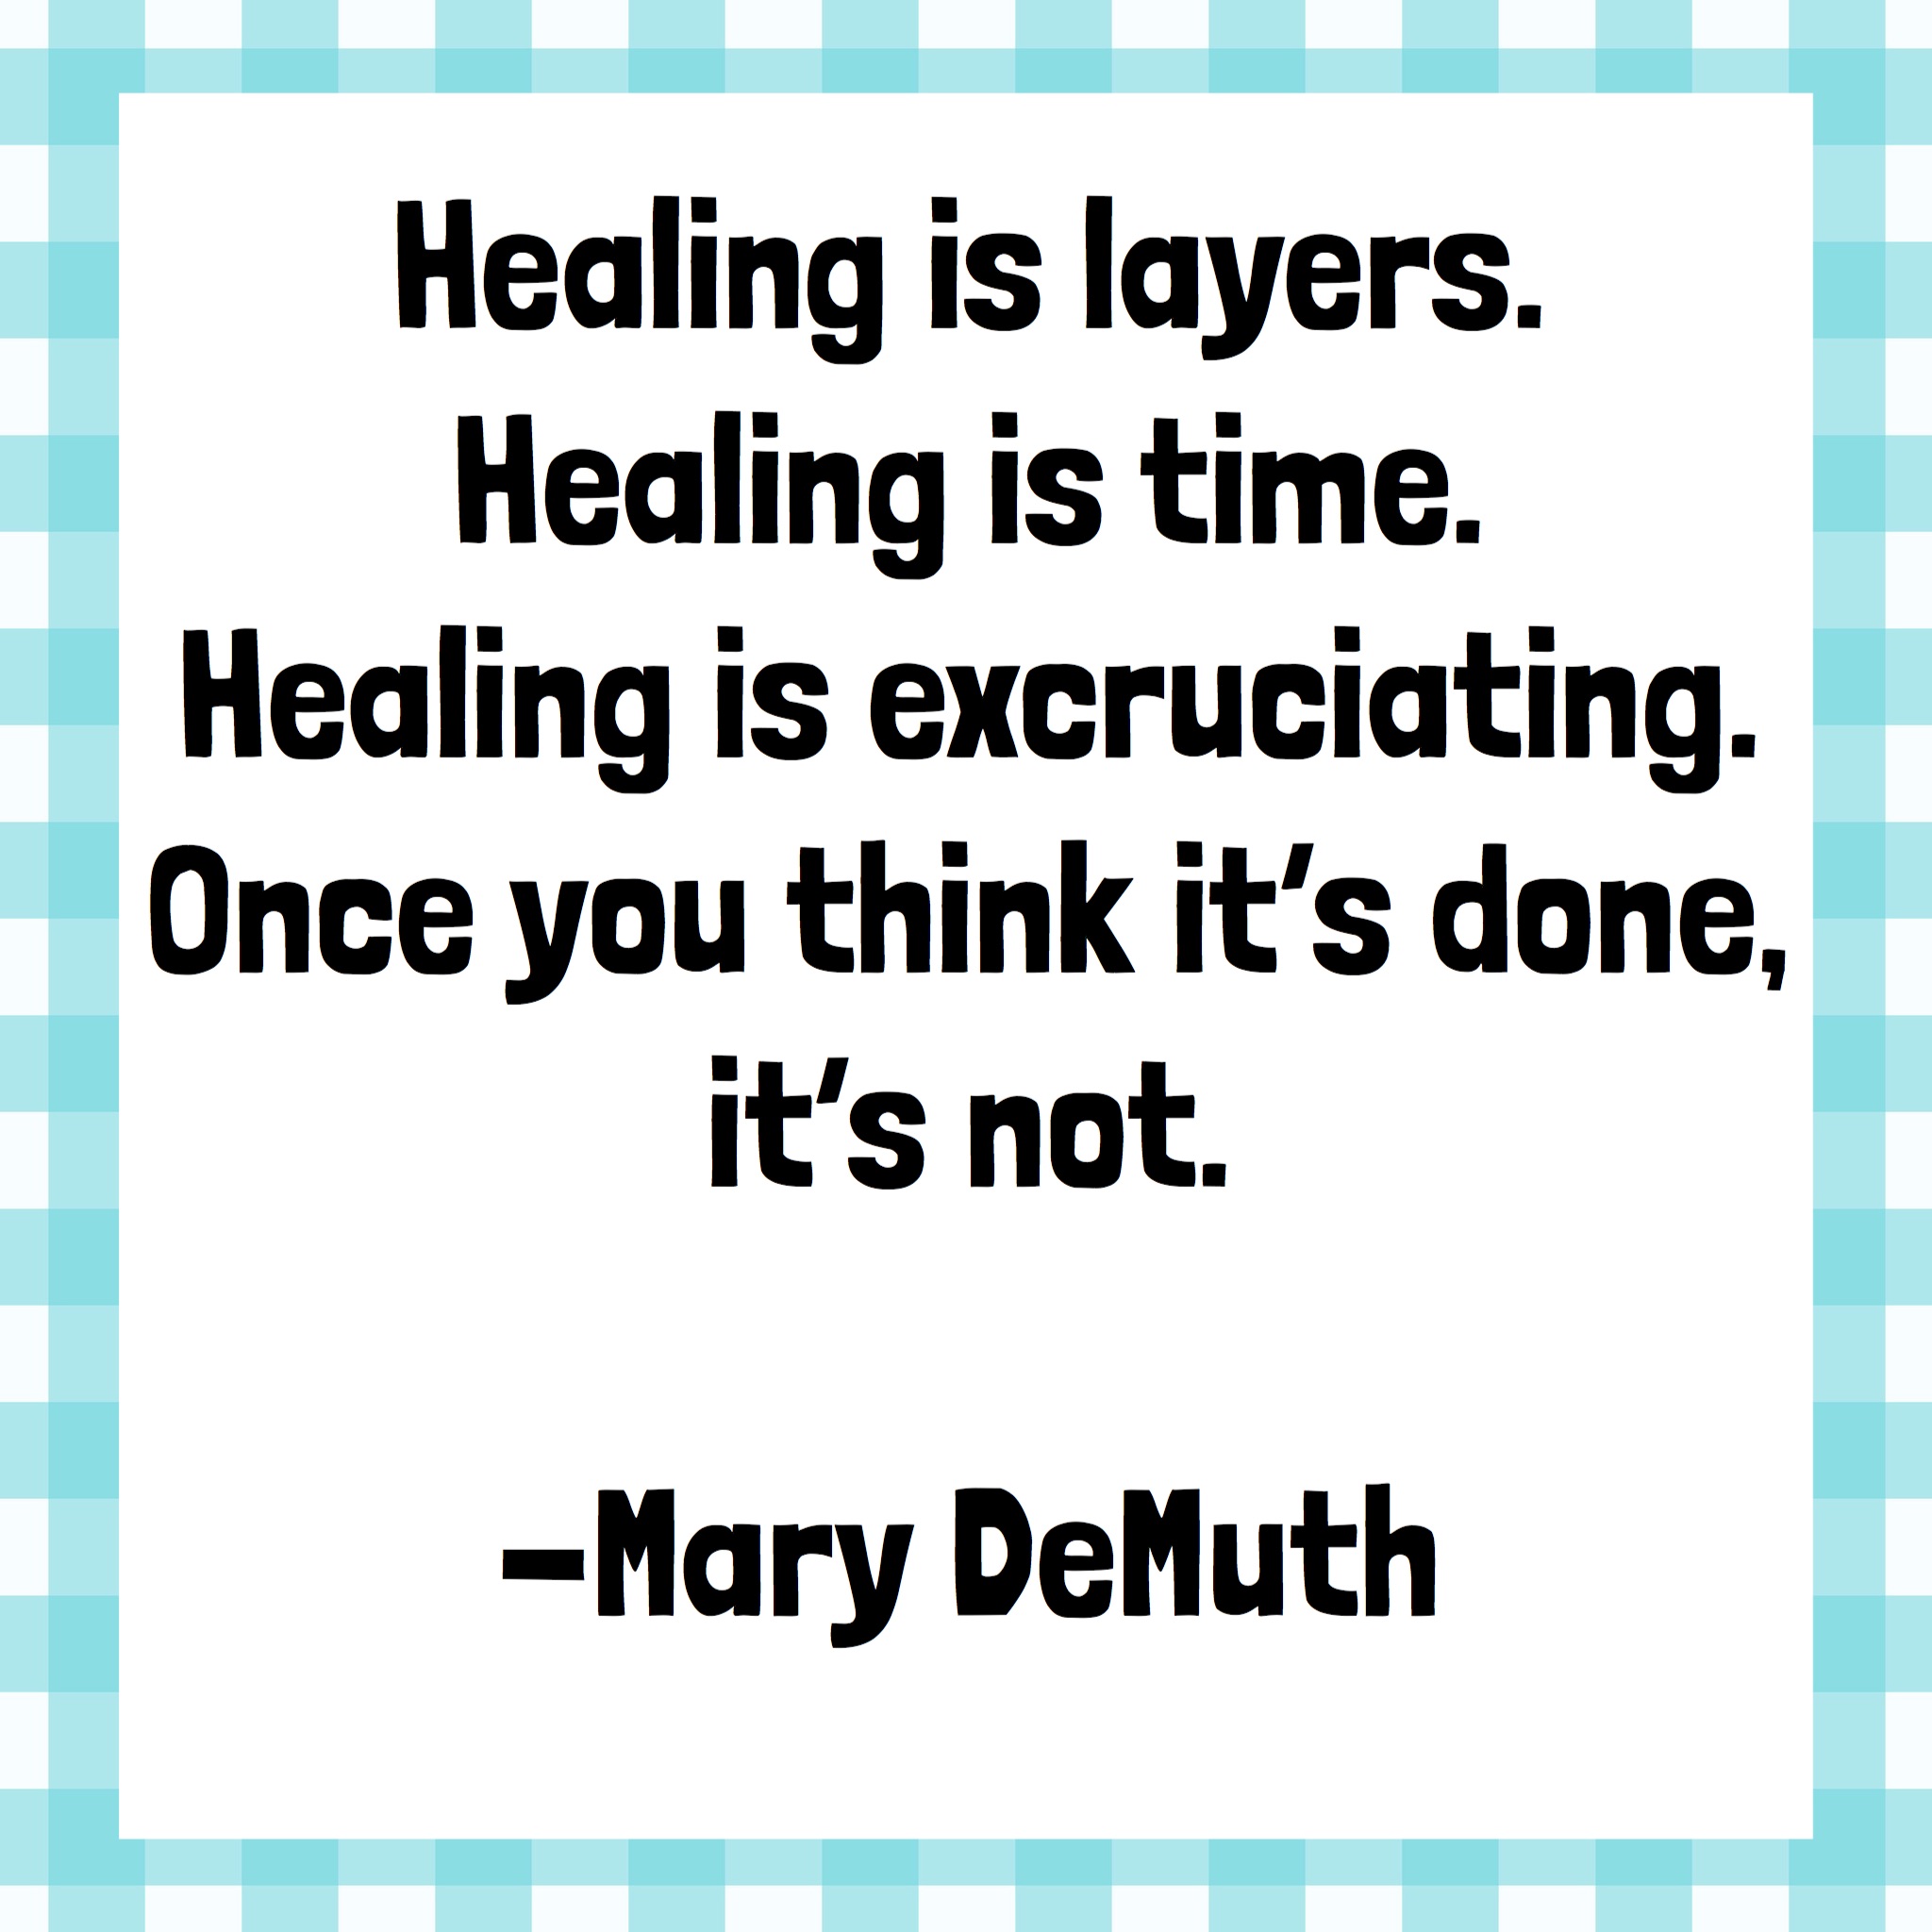 Healing is Excruciating